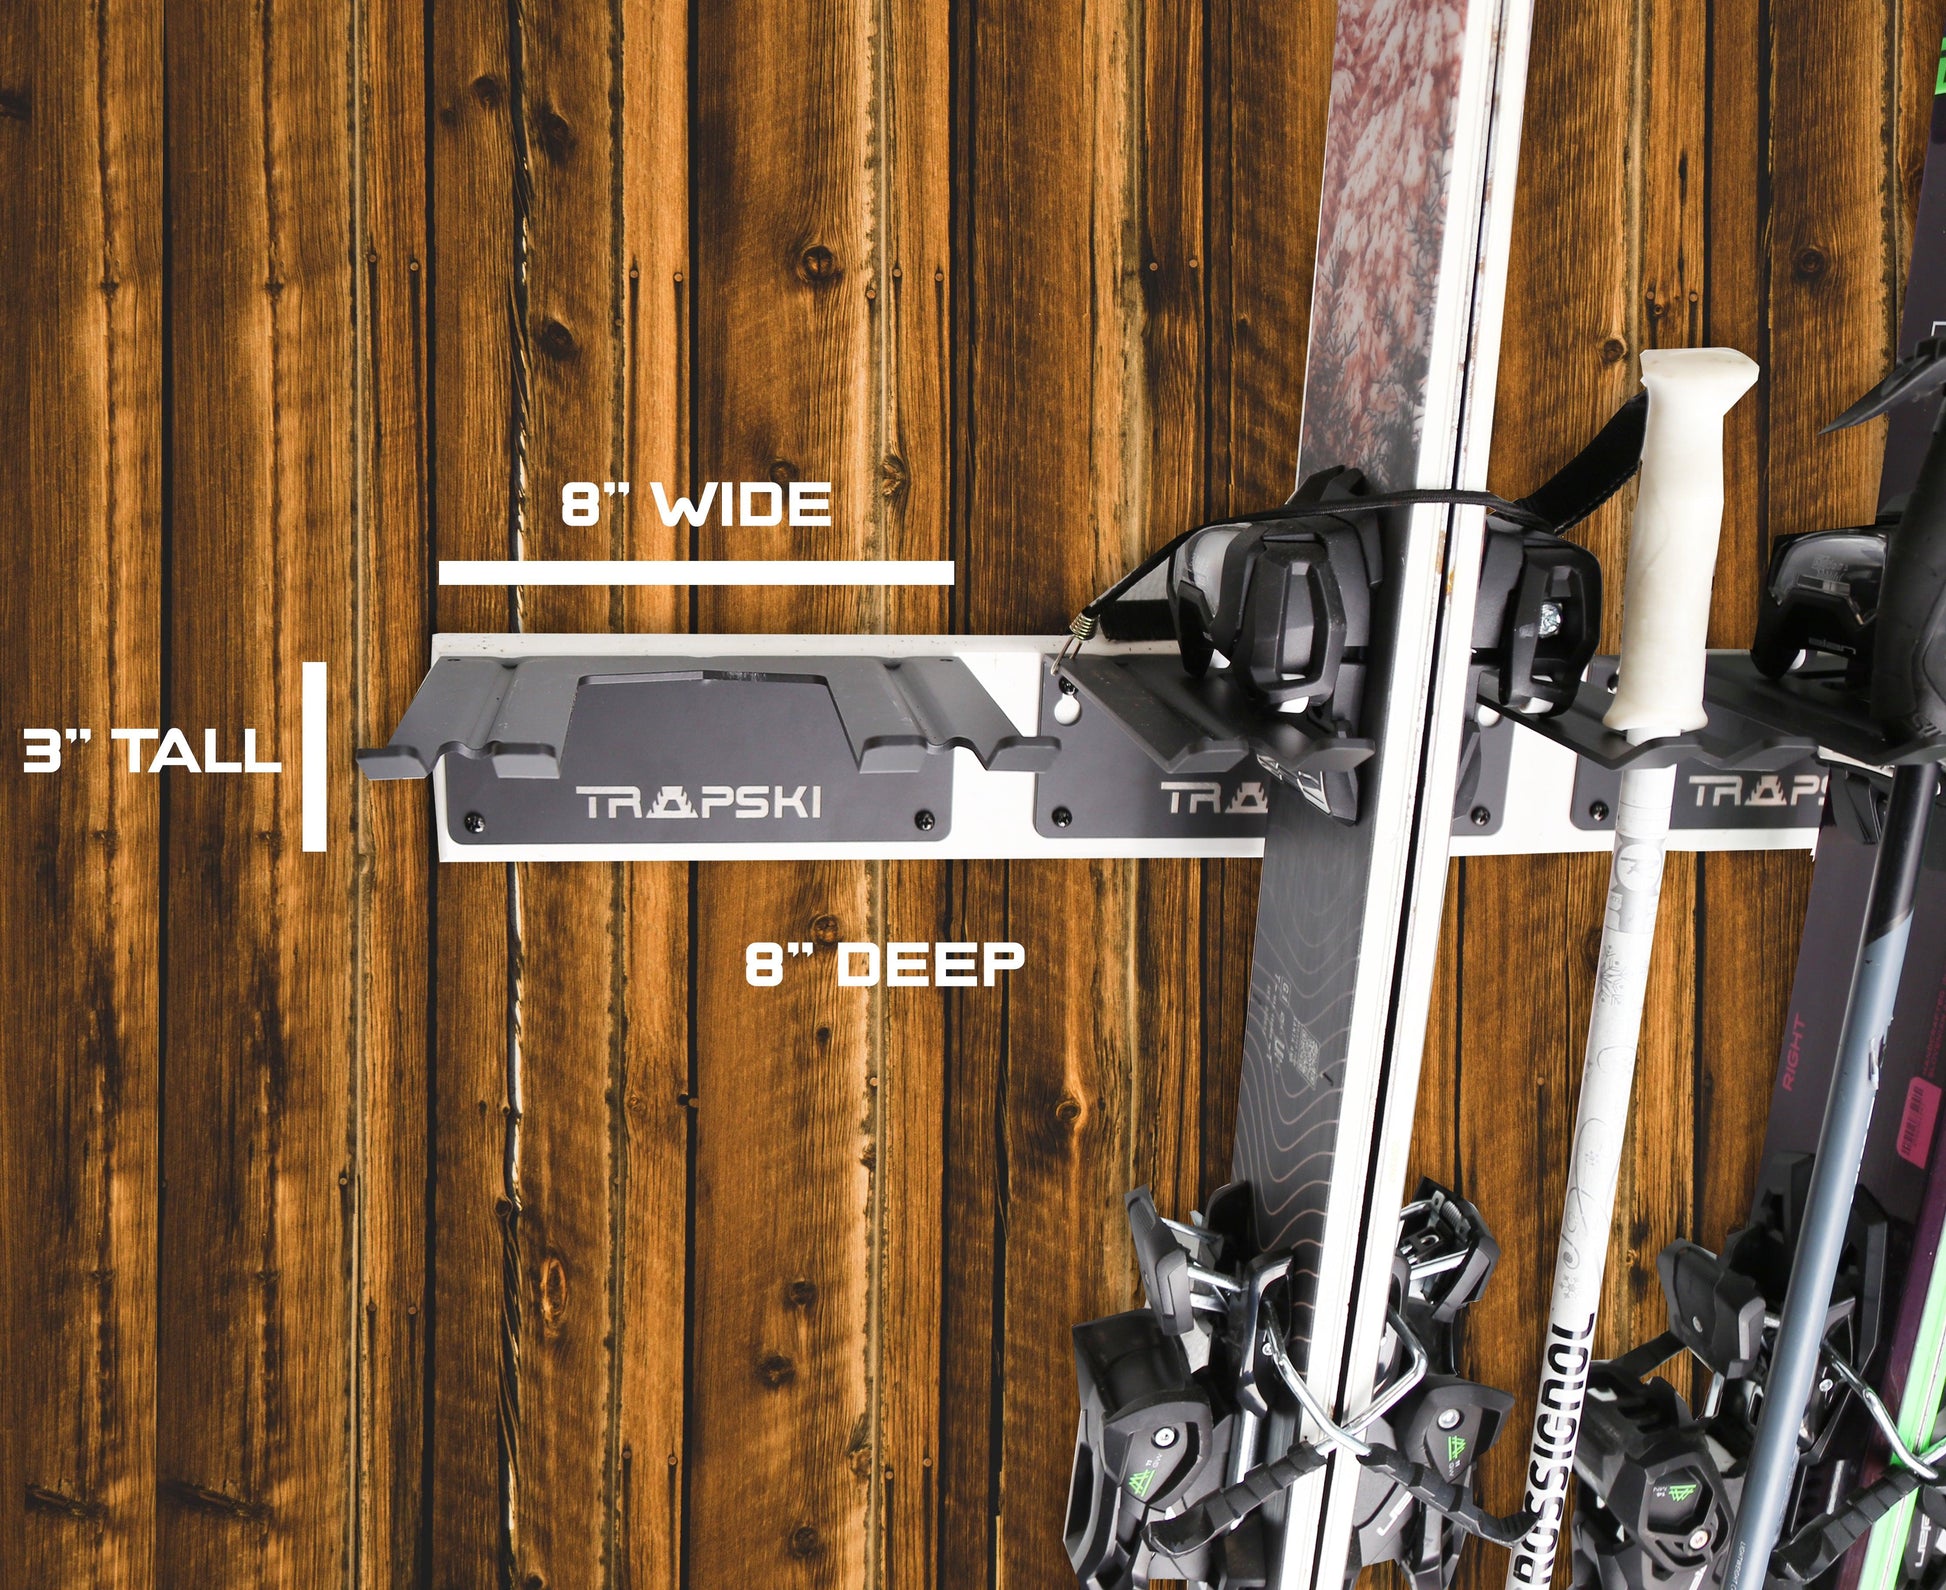 TRAPAWAY Wall Rack | Holds Skis or Snowboard by Bindings | Garage Organizer for Yard Tools, Gear & Equipment | Aluminum | No Moving Parts to break or pinch | Made in the USA - TRAPSKI, LLC